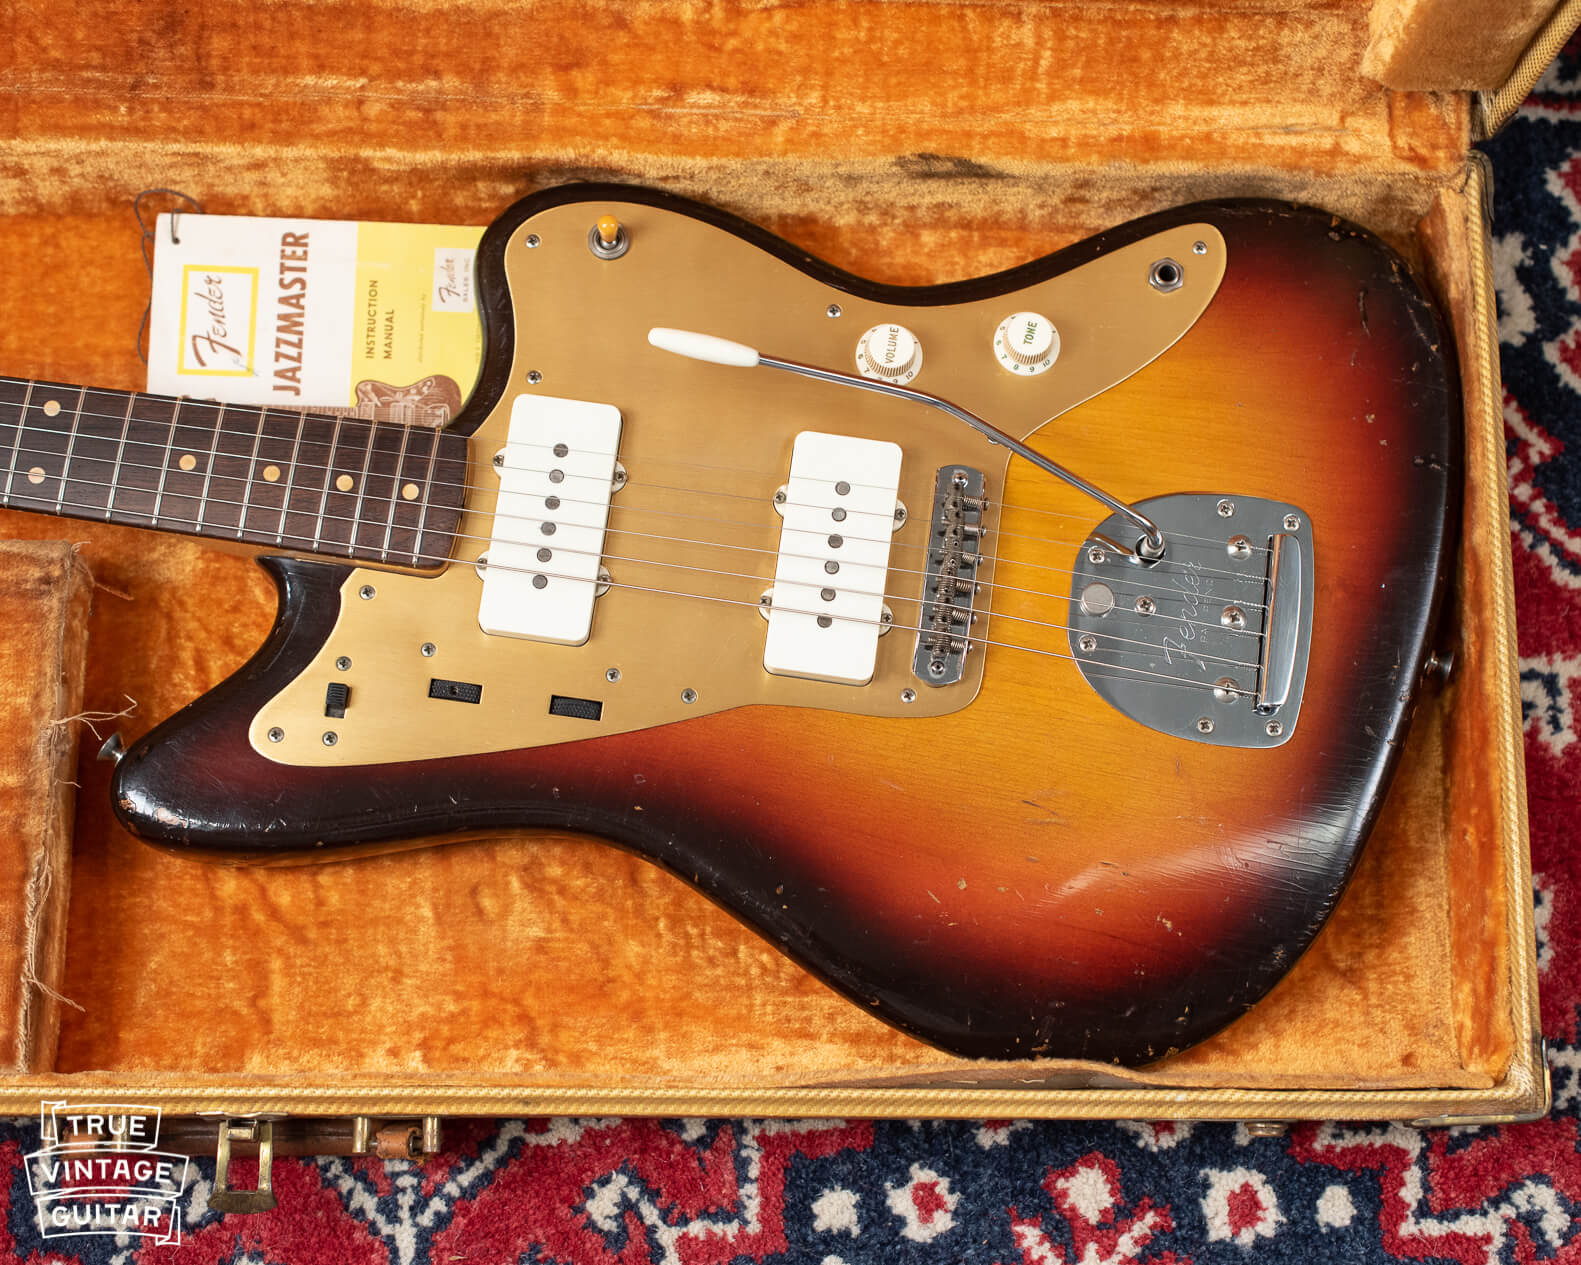 What is a gold guard Fender Jazzmaster